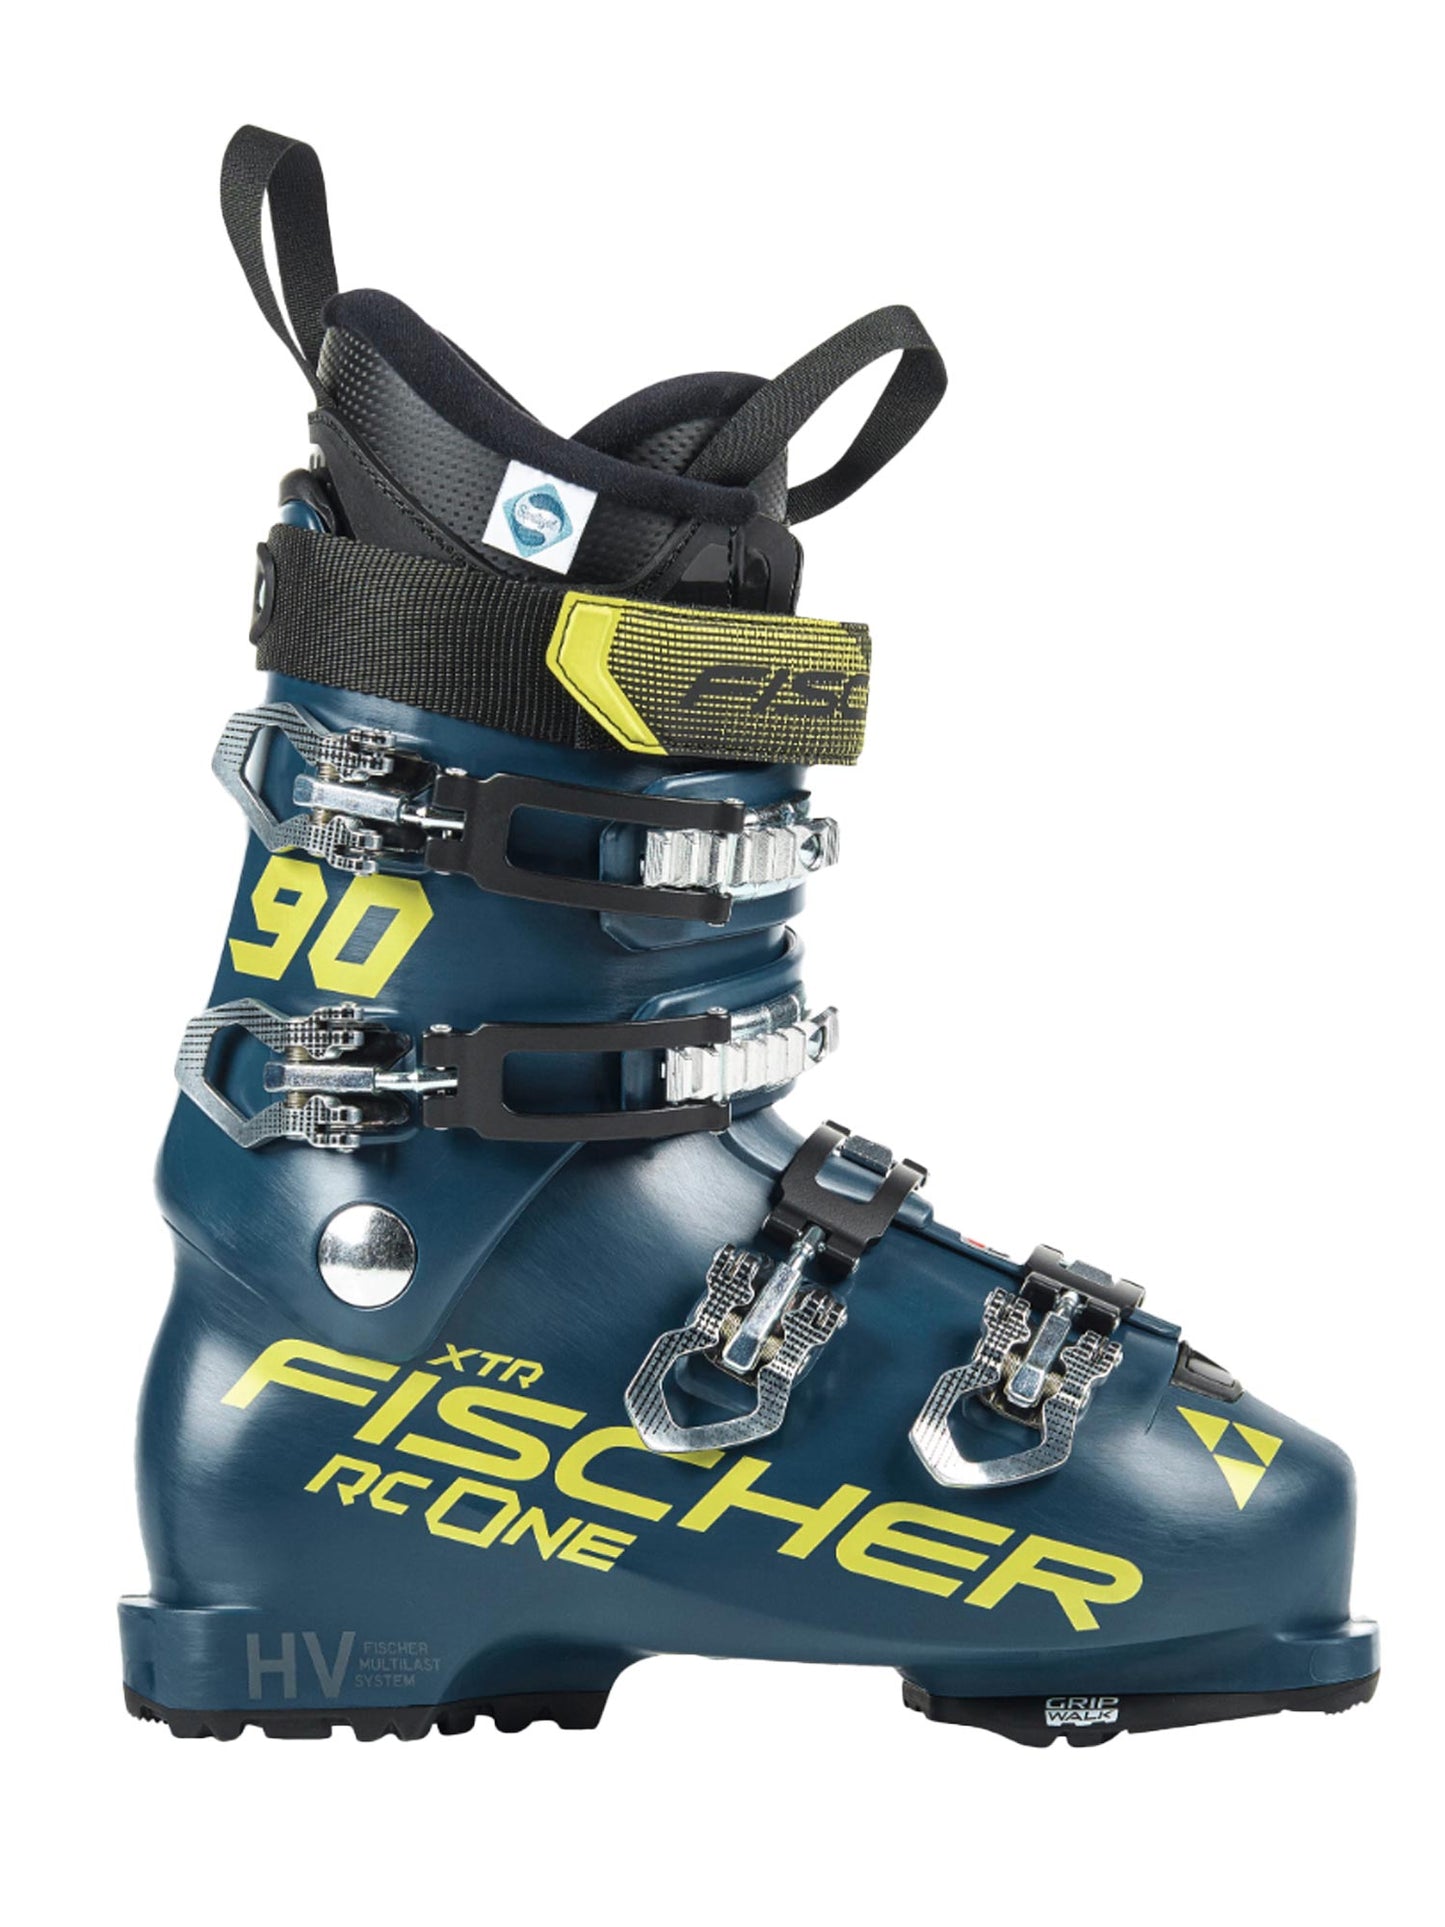 Fischer RC One 90 XTR ski boot, blue and yellow